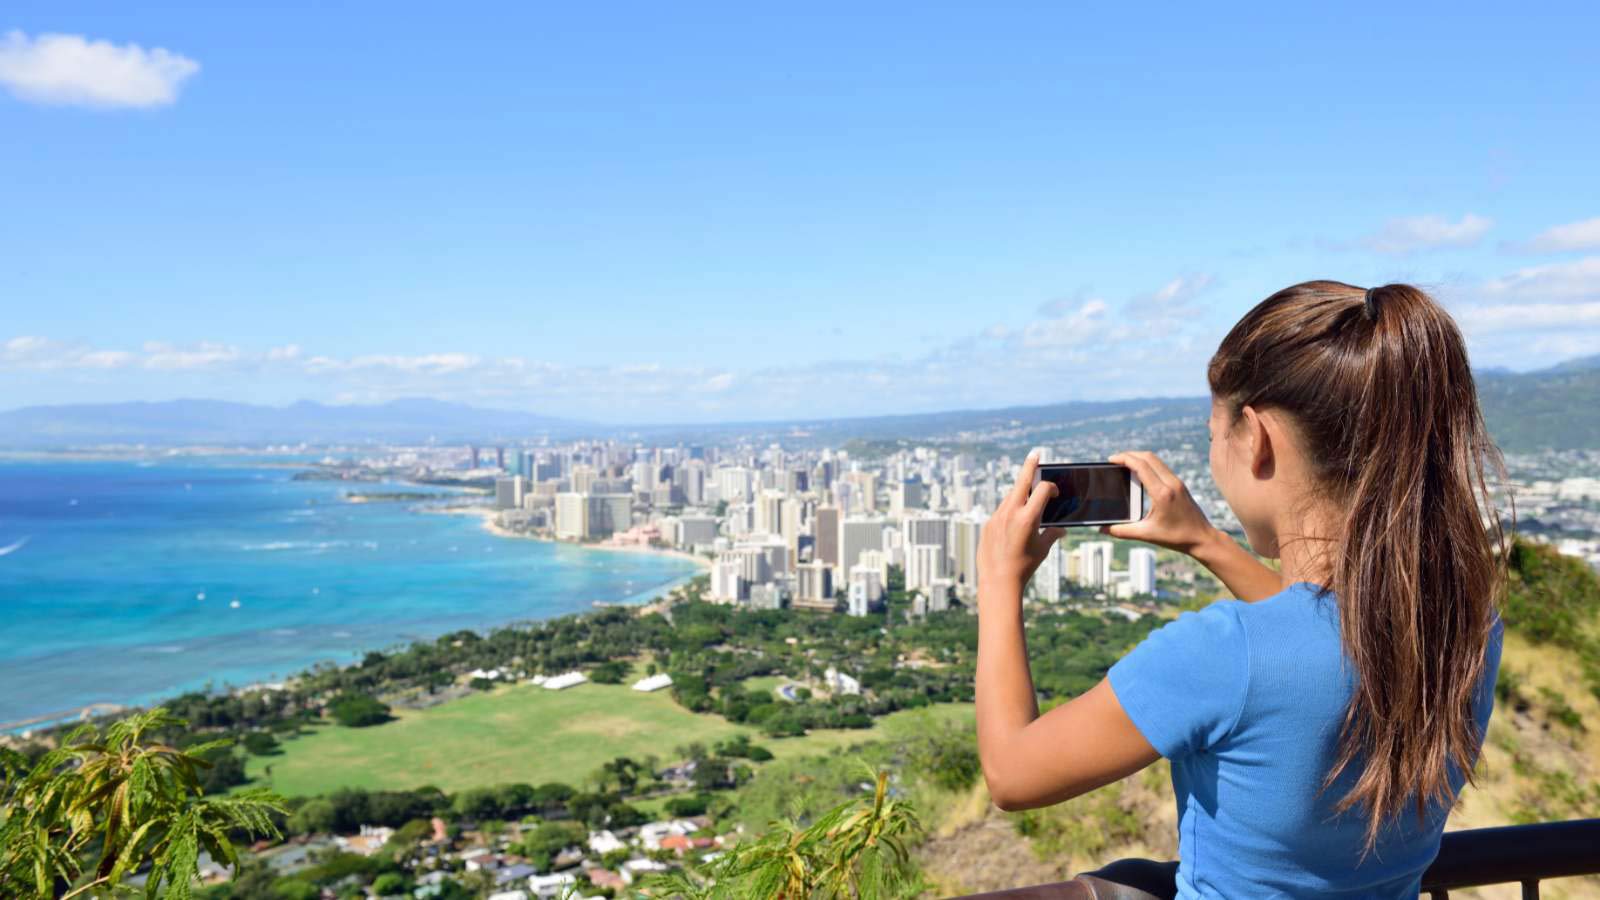 <p>Many people don’t realize that Diamond Head is not a peninsula but a crater. The military realized the strategic importance of Diamond Head and built lookout towers and bunkers at the top. Visitors can hike to the top, 560 feet above sea level, but it can be crowded, making it challenging to take that perfect selfie.</p>